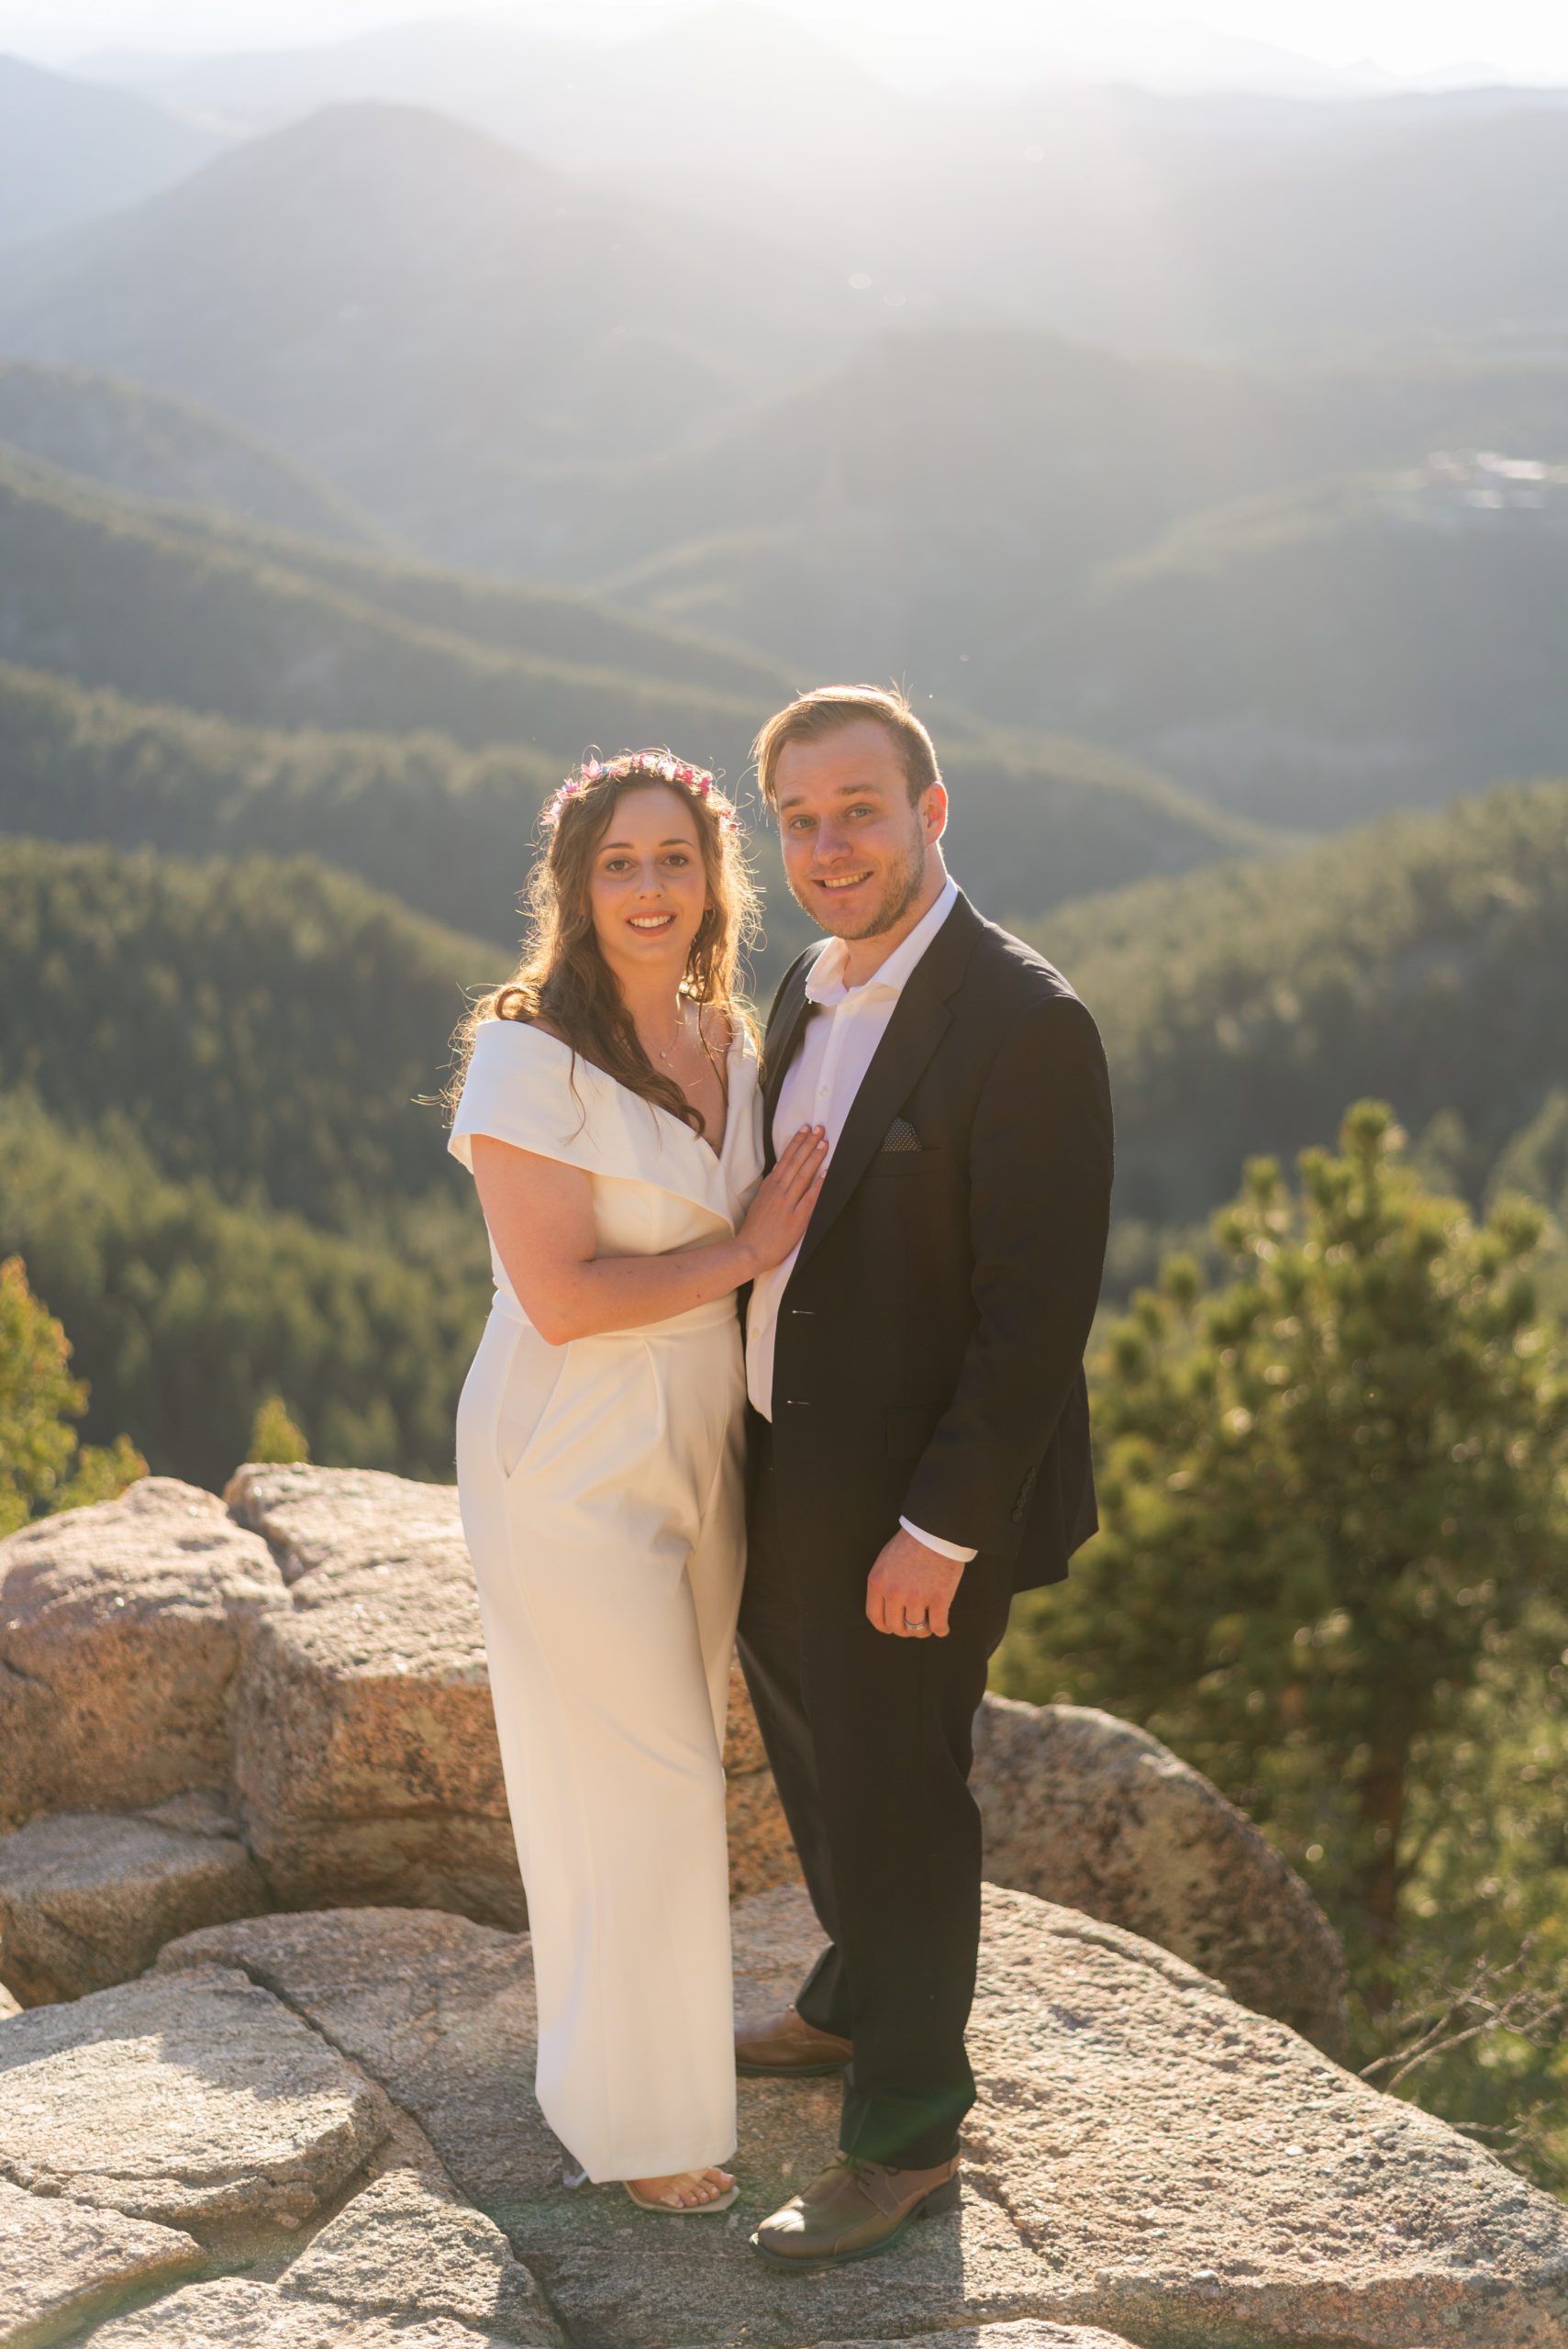 The bride and groom smile at the camera during their Boulder hiking elopement near realization point.